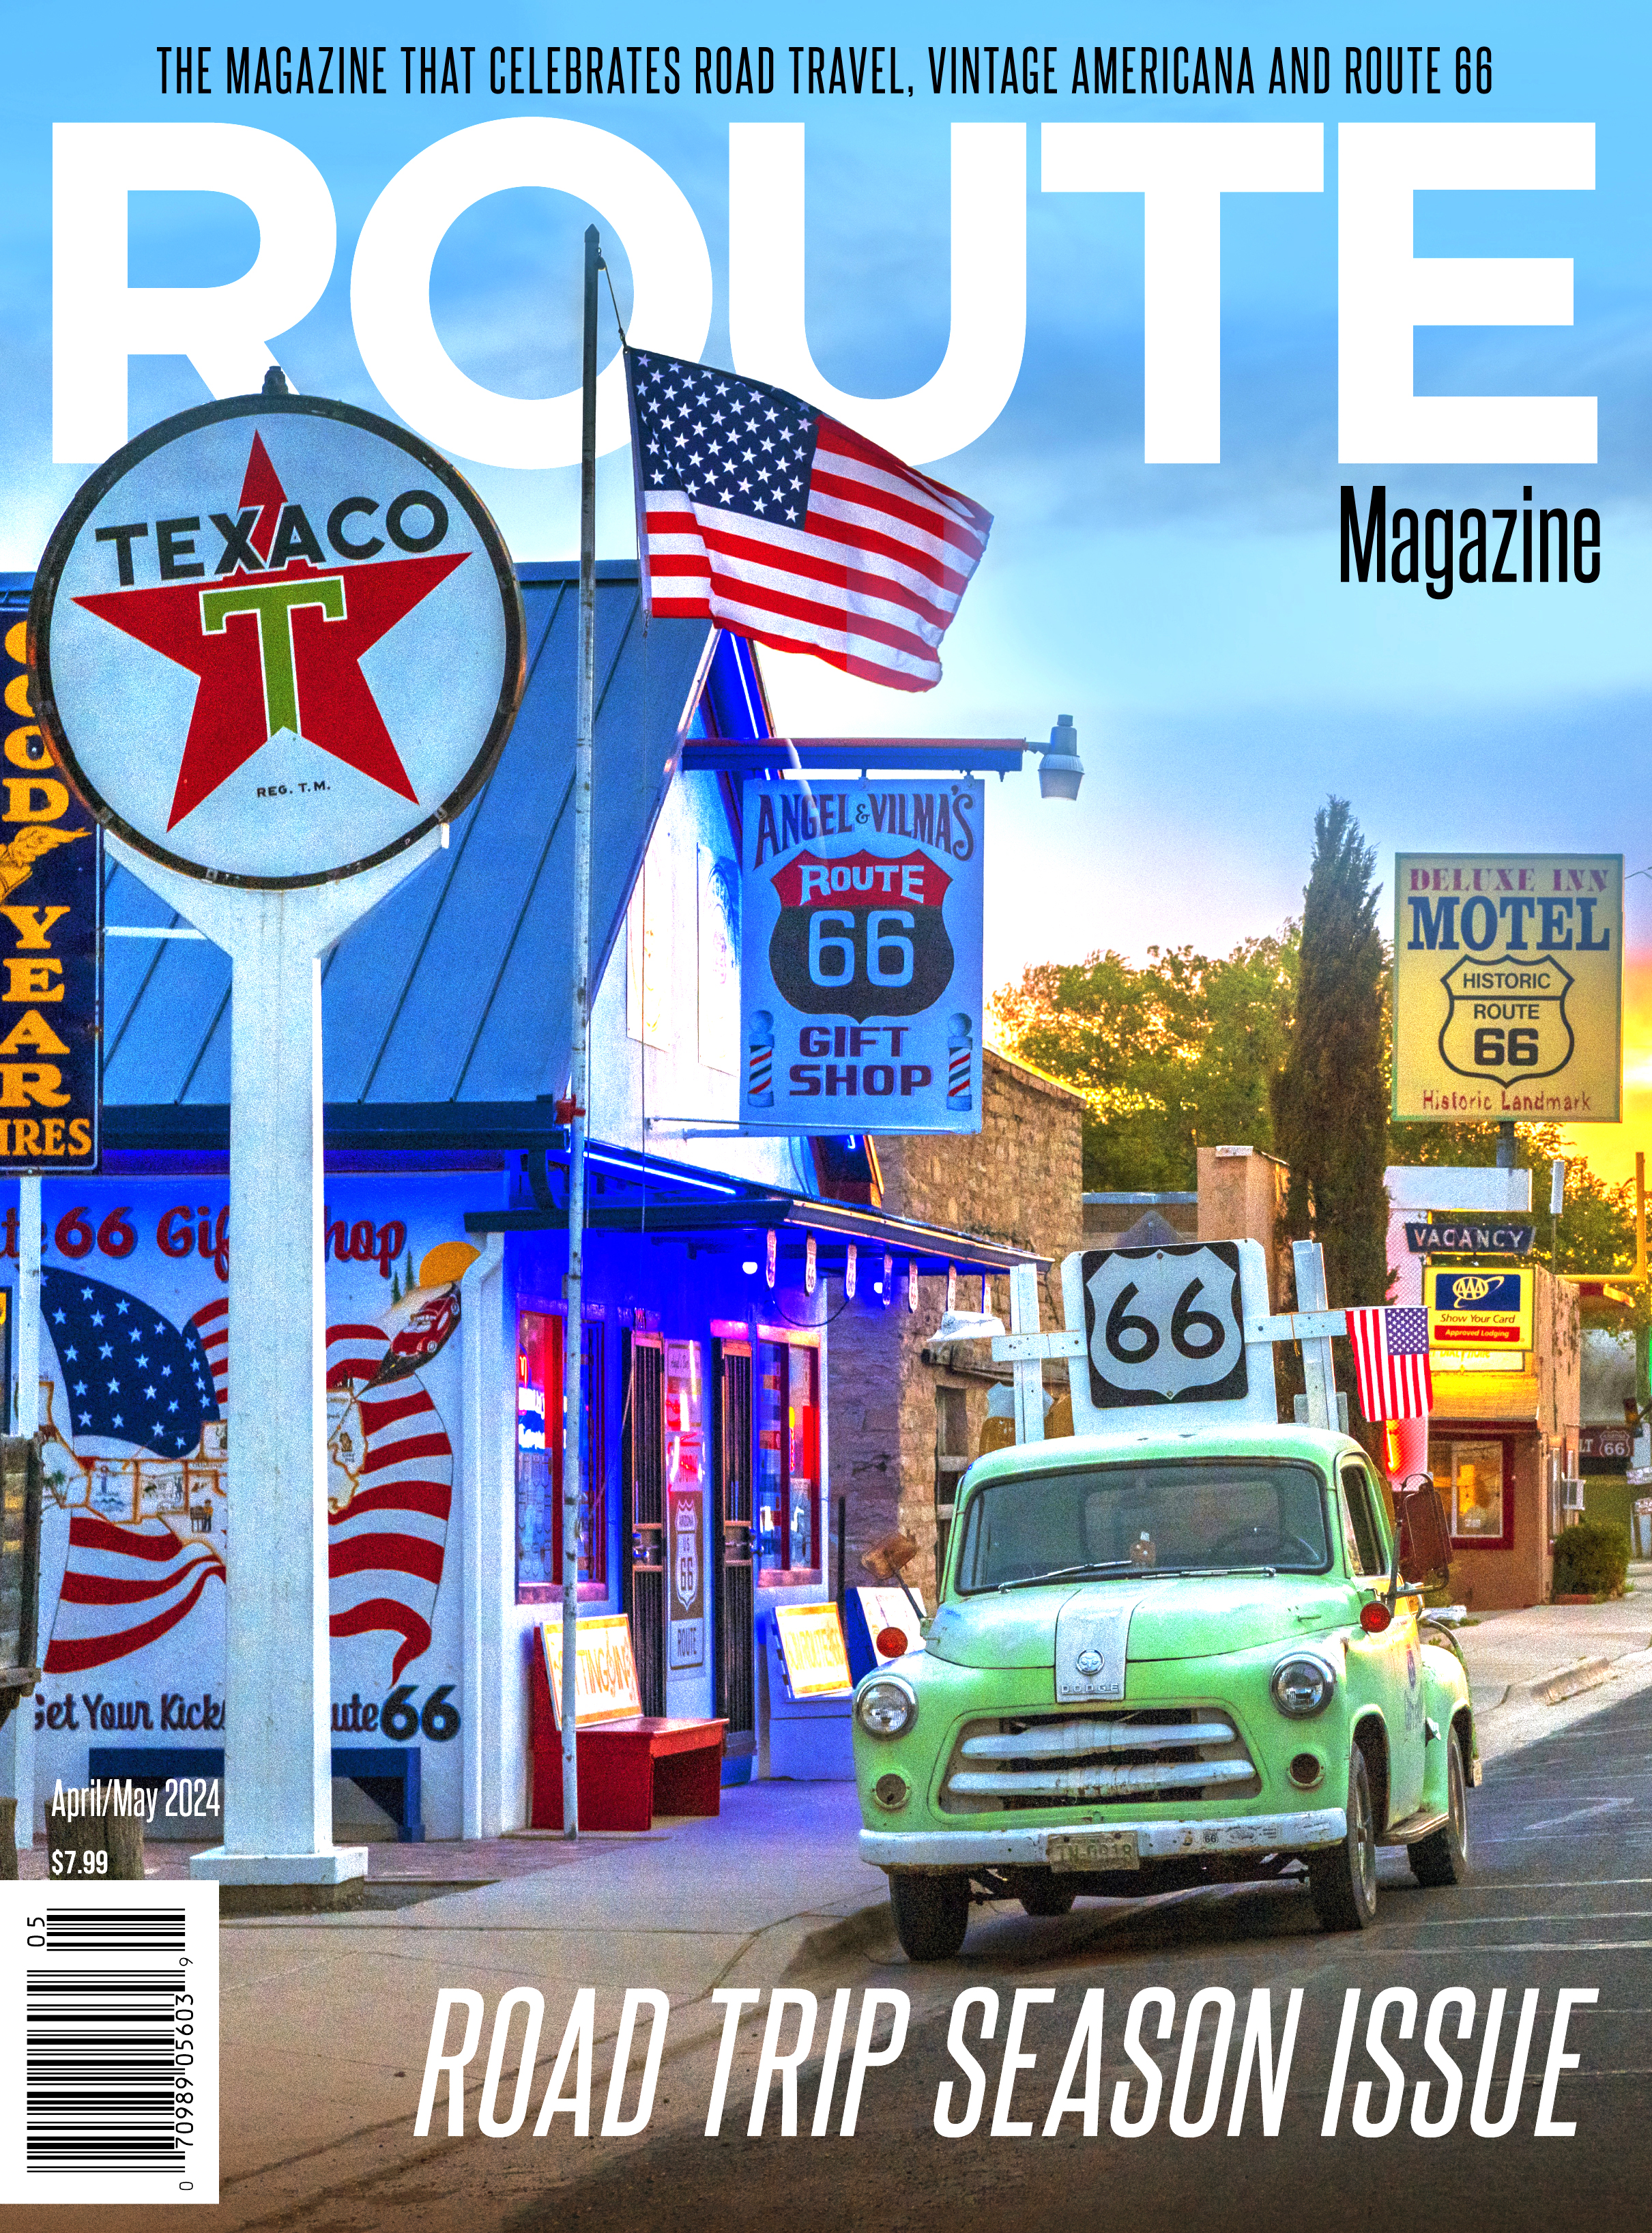 April-May 2024, Route 66 Magazine